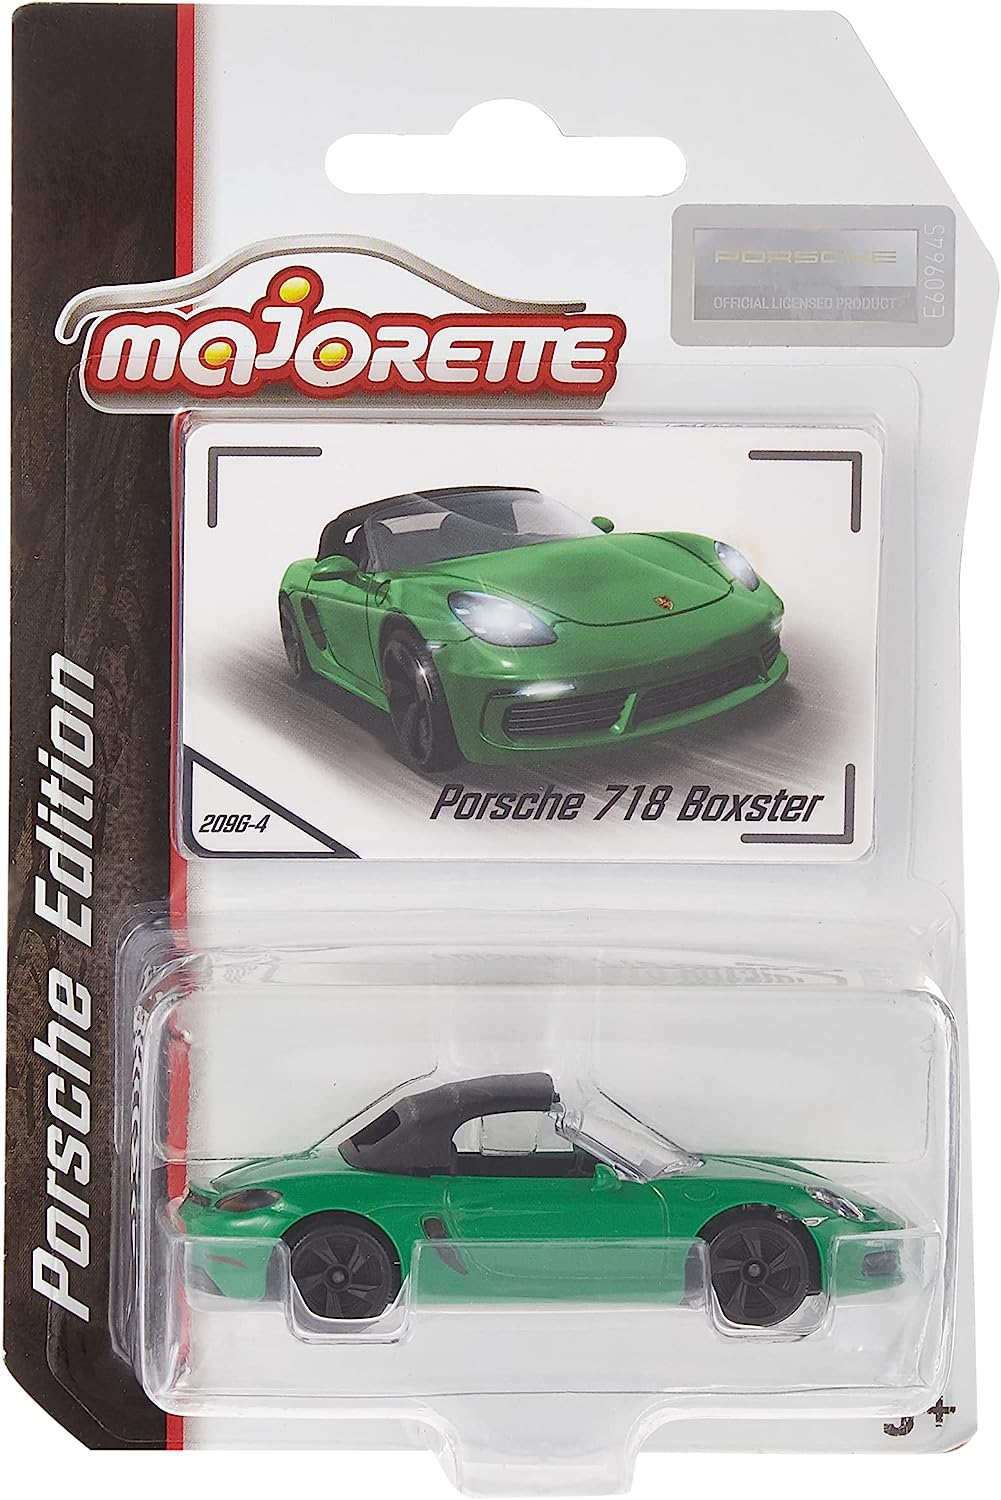 Majorette Porsche Premium Cars - Design & Style May Vary, Only 1 Model  Included